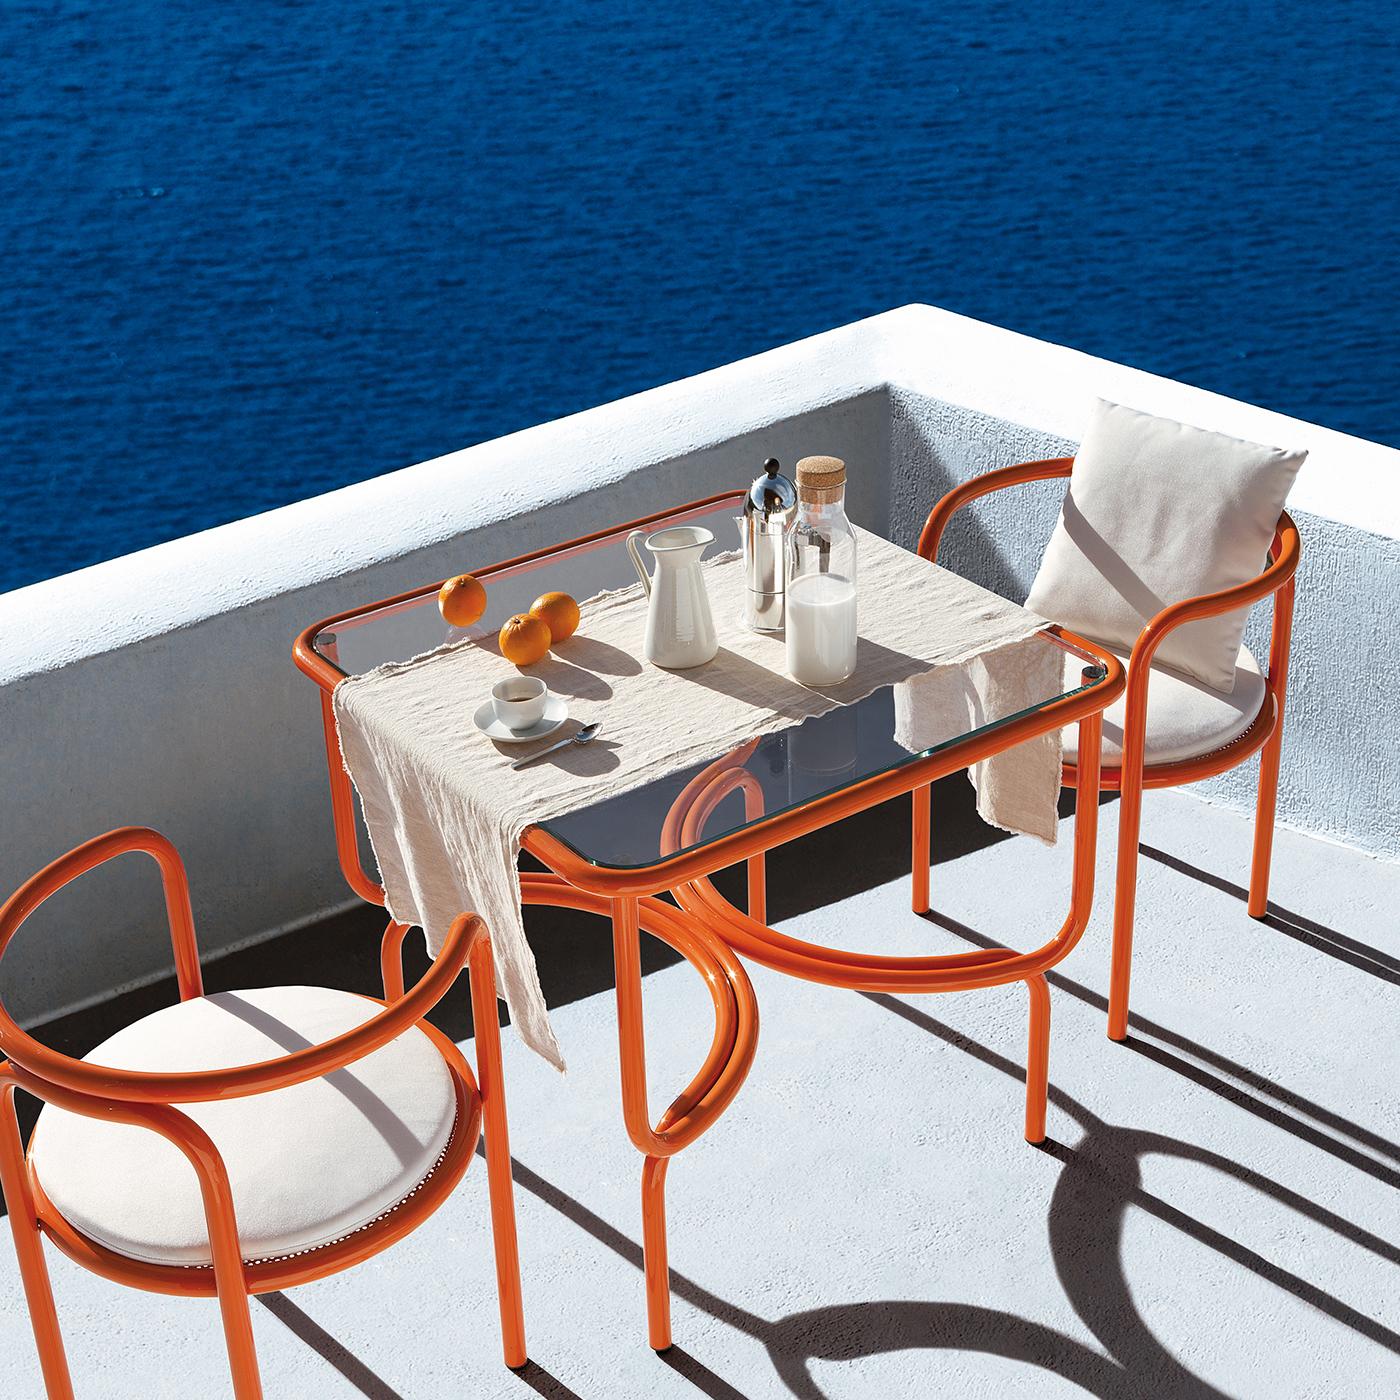 This dining table is an original design from the Locus Solus series of outdoor furniture designed by Gae Aulenti in 1964, brought back by Exteta in 2016. The linear frame of tubular steel is enriched by unexpected curves along the base that recall